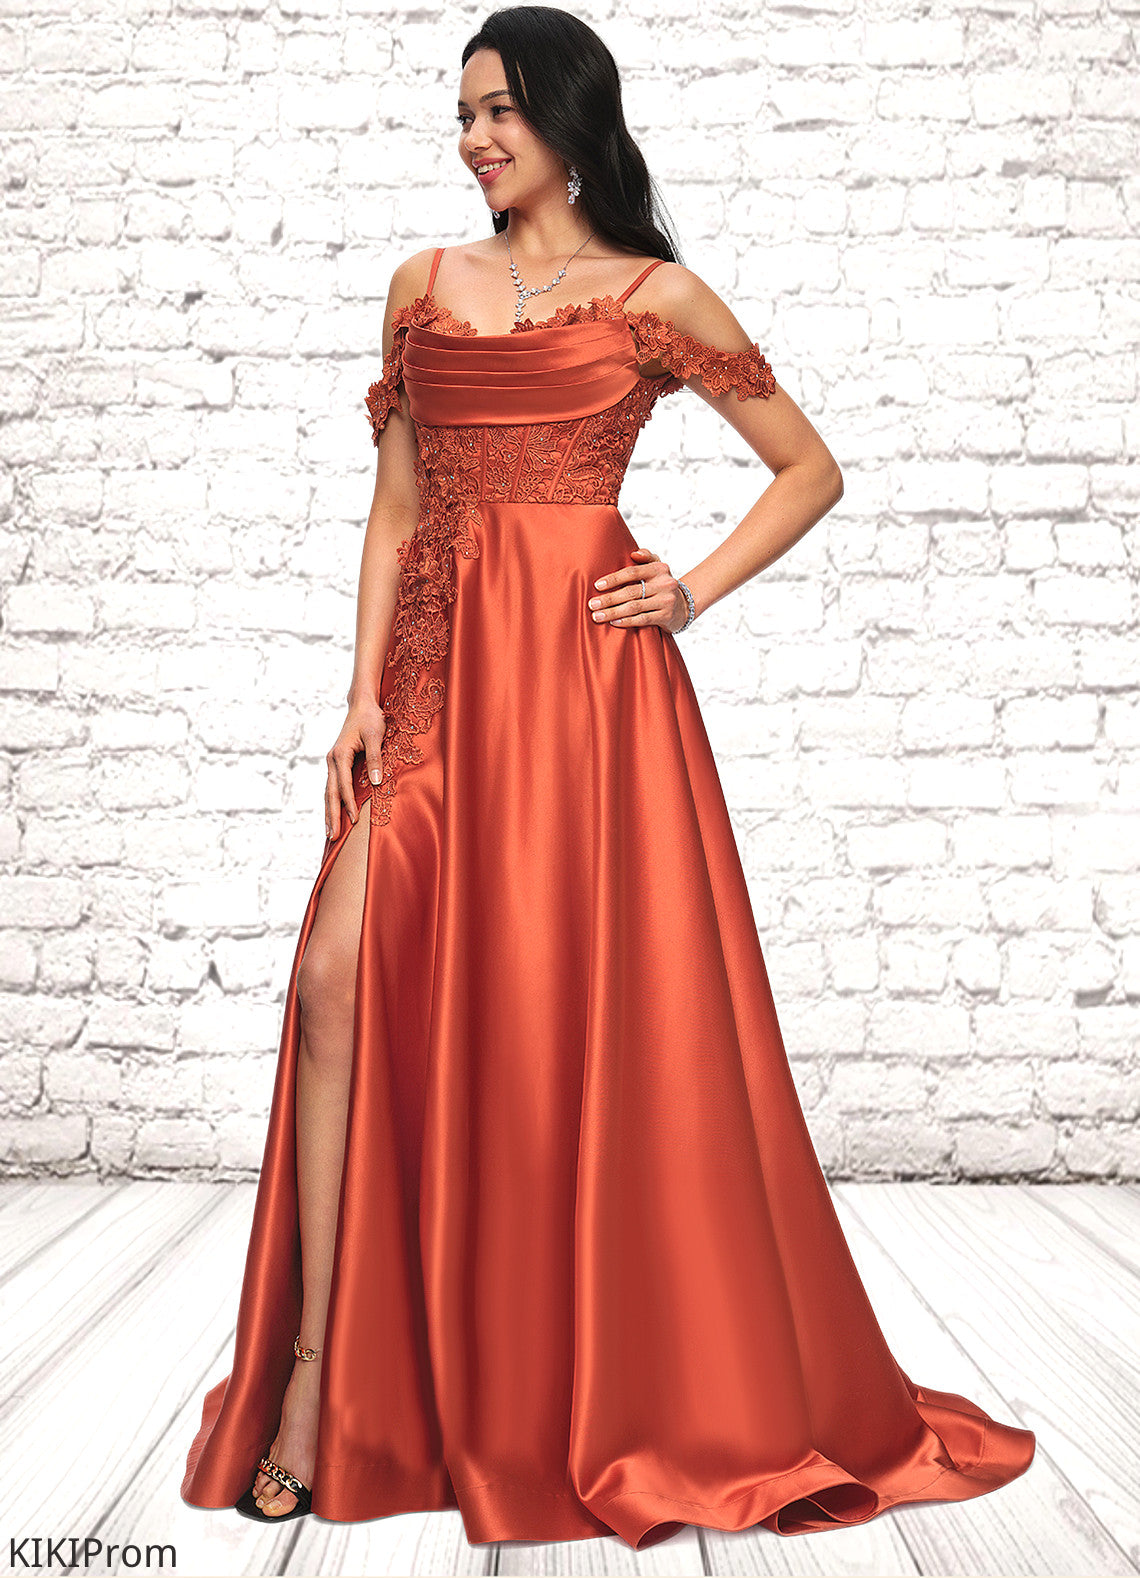 Hillary A-line Off the Shoulder Sweep Train Satin Prom Dresses With Rhinestone DZP0022208